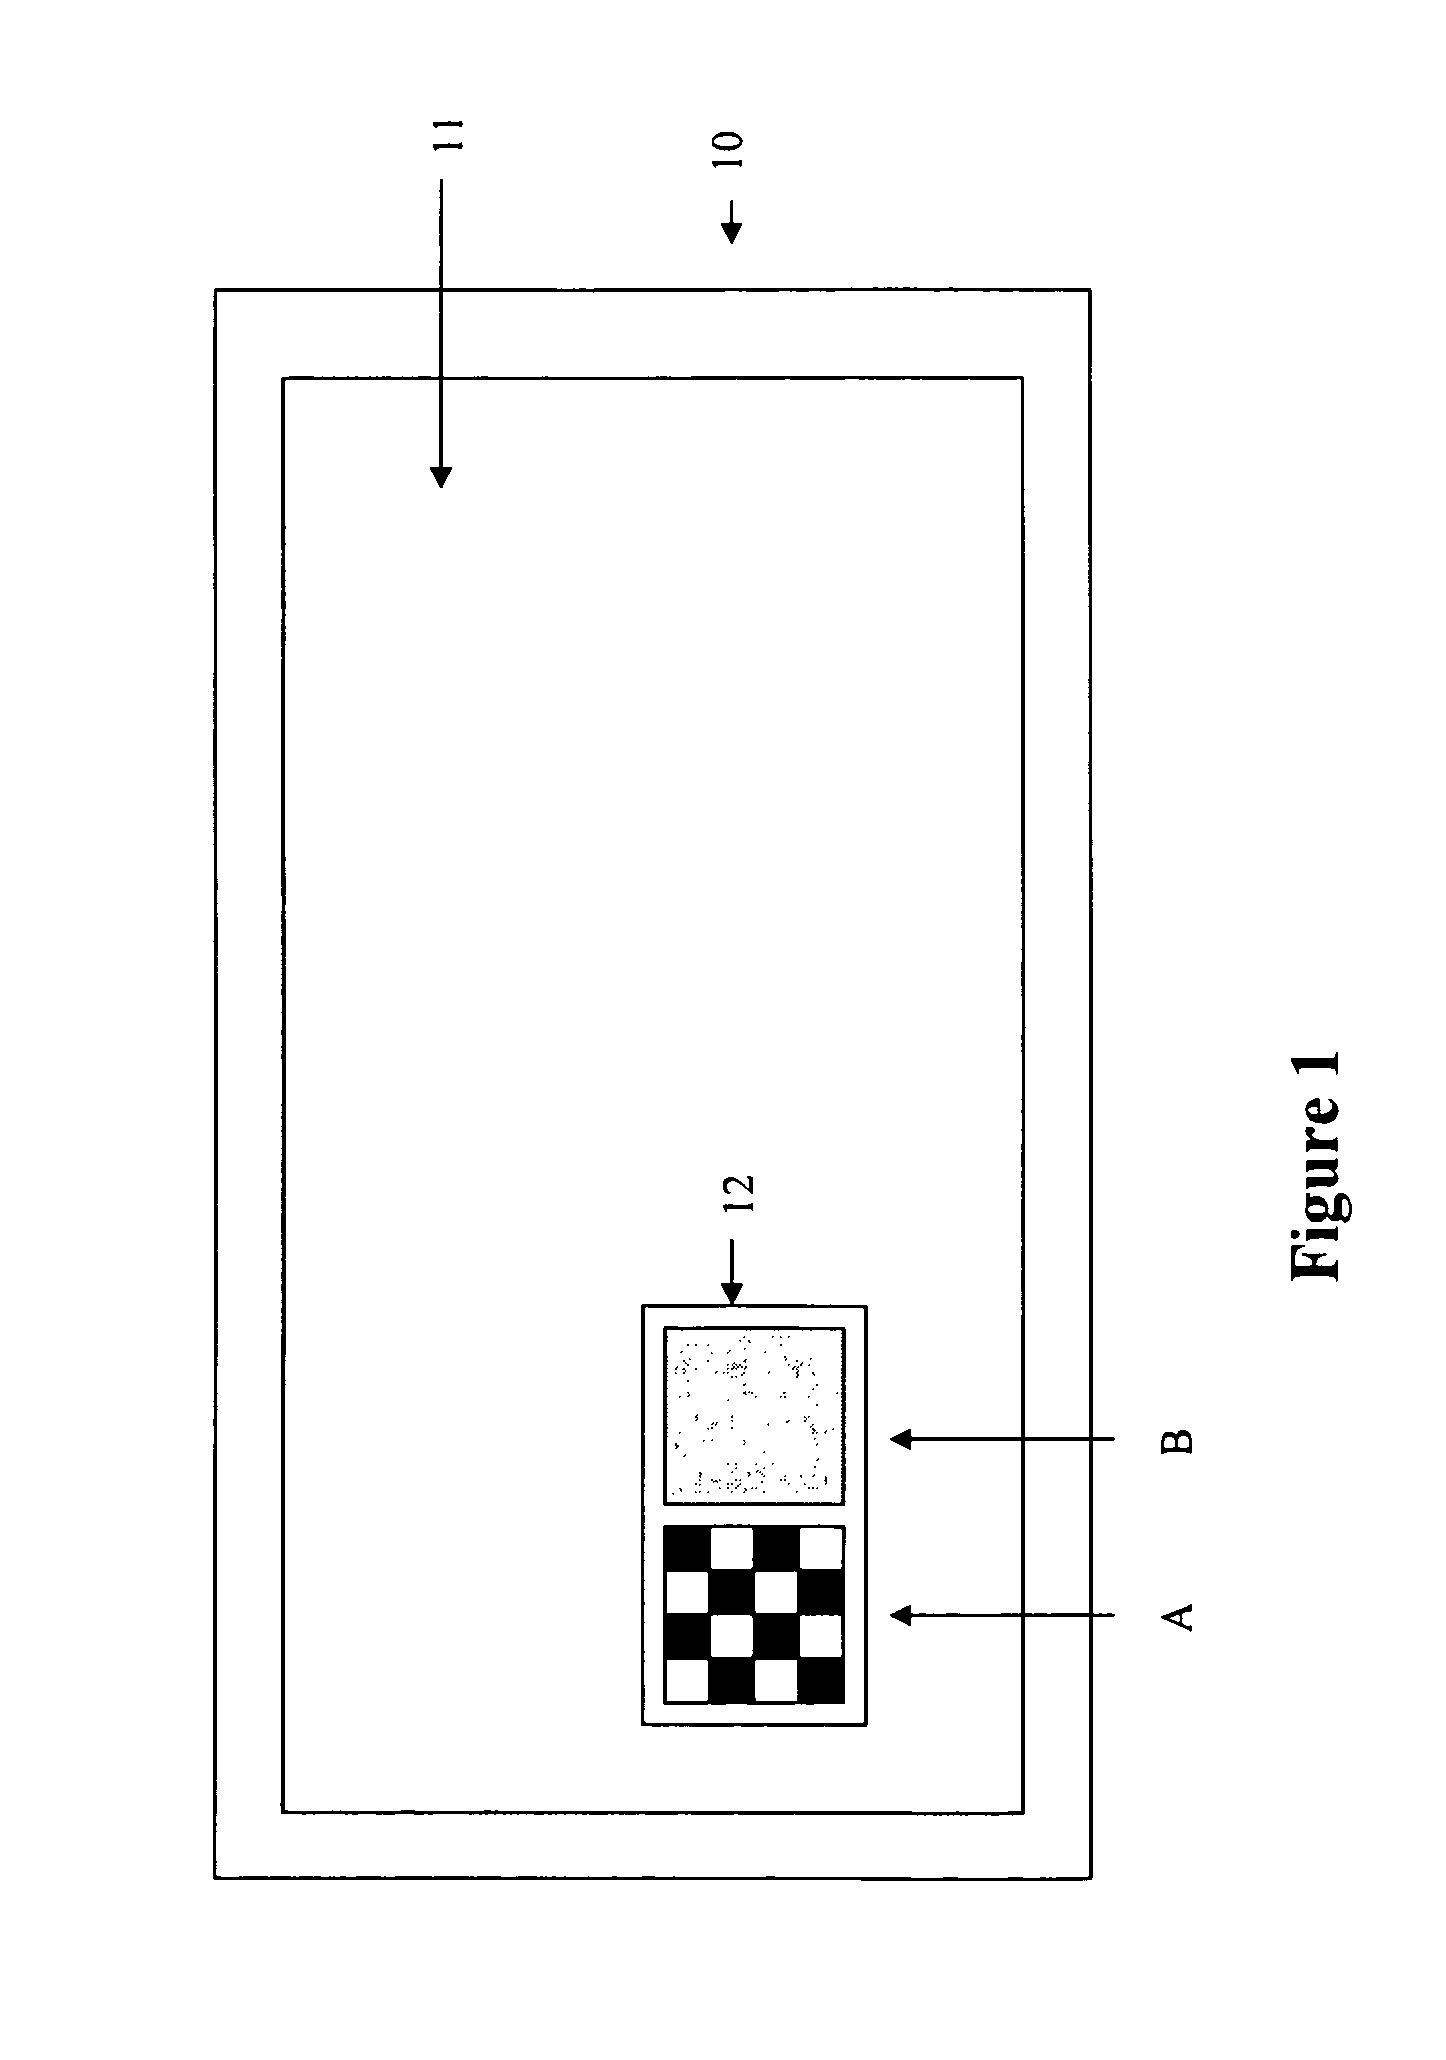 Approach to adjust driving waveforms for a display device